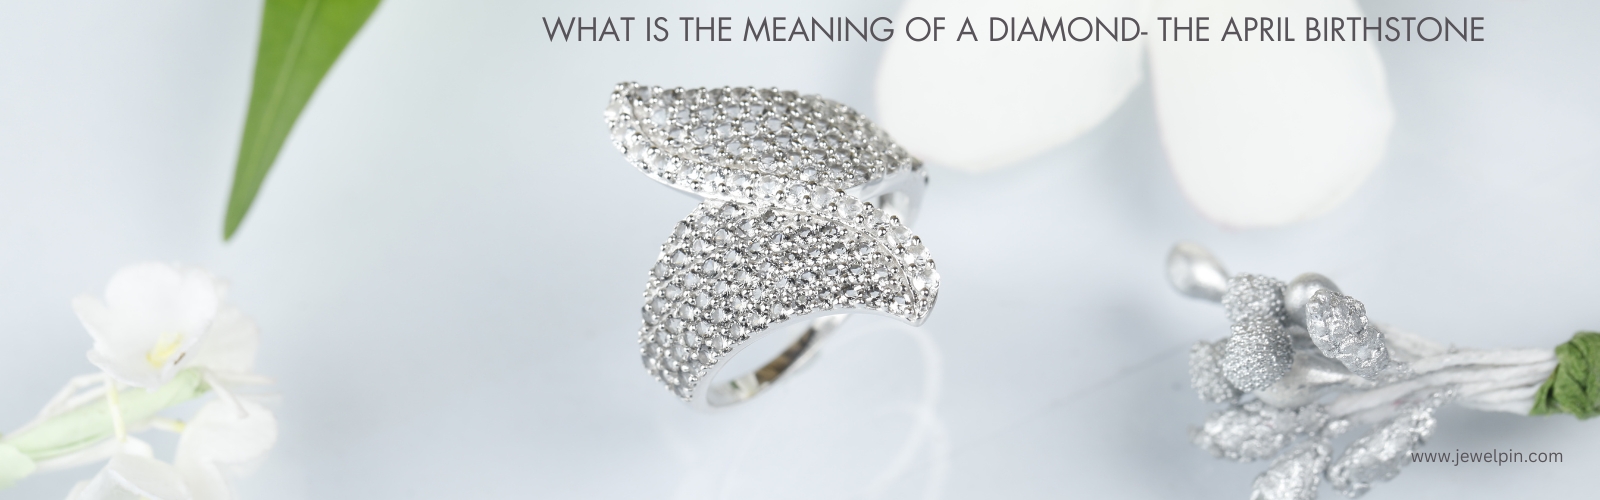 what is the meaning of a diamond birthstone